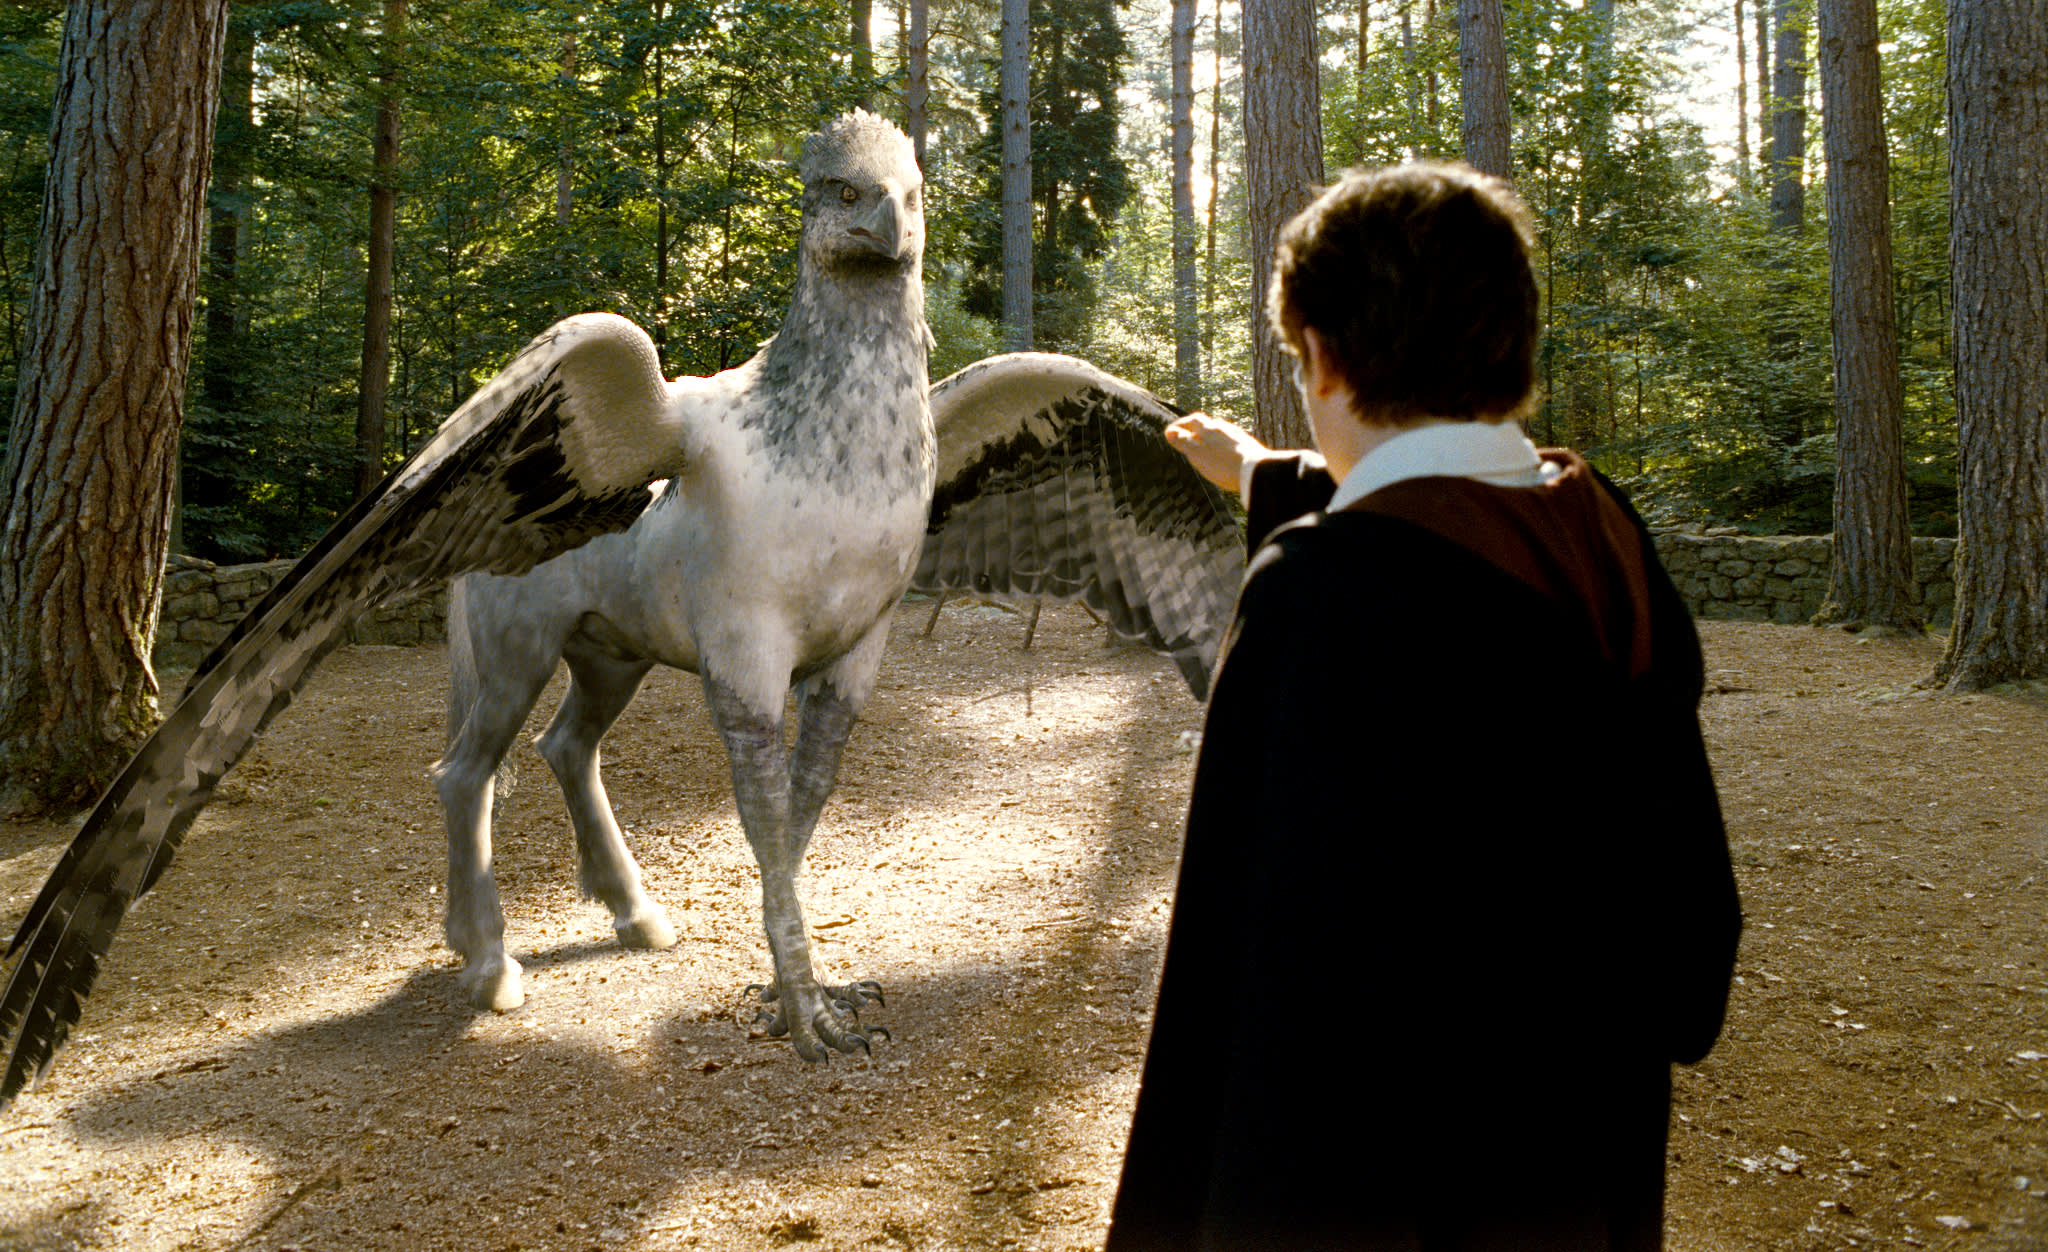 The cutest creatures of the wizarding world